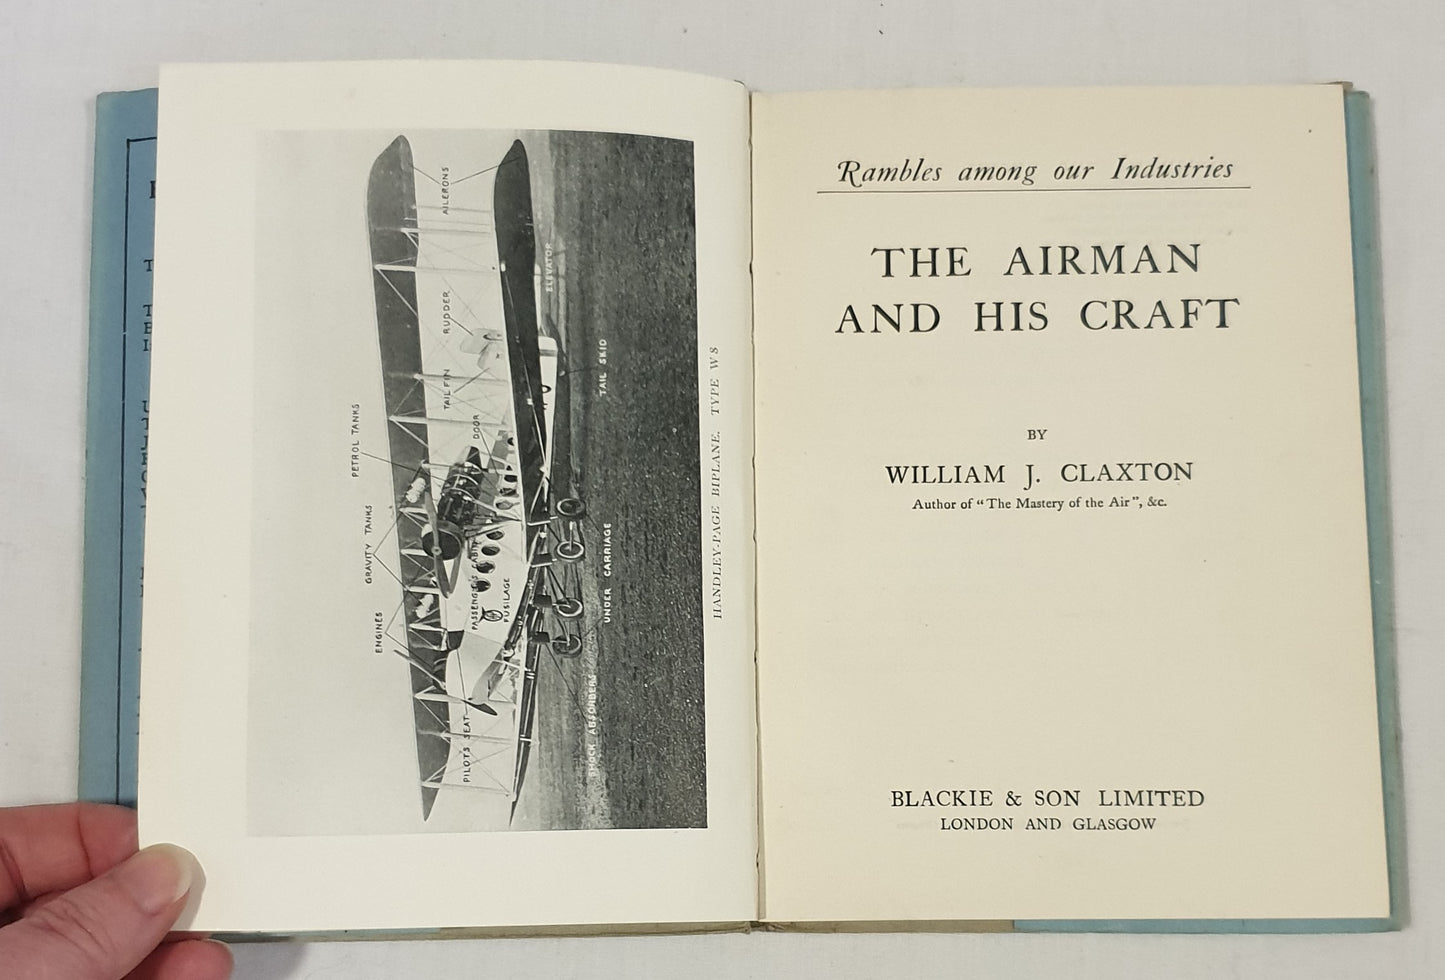 The Airman and His Craft by William J. Claxton